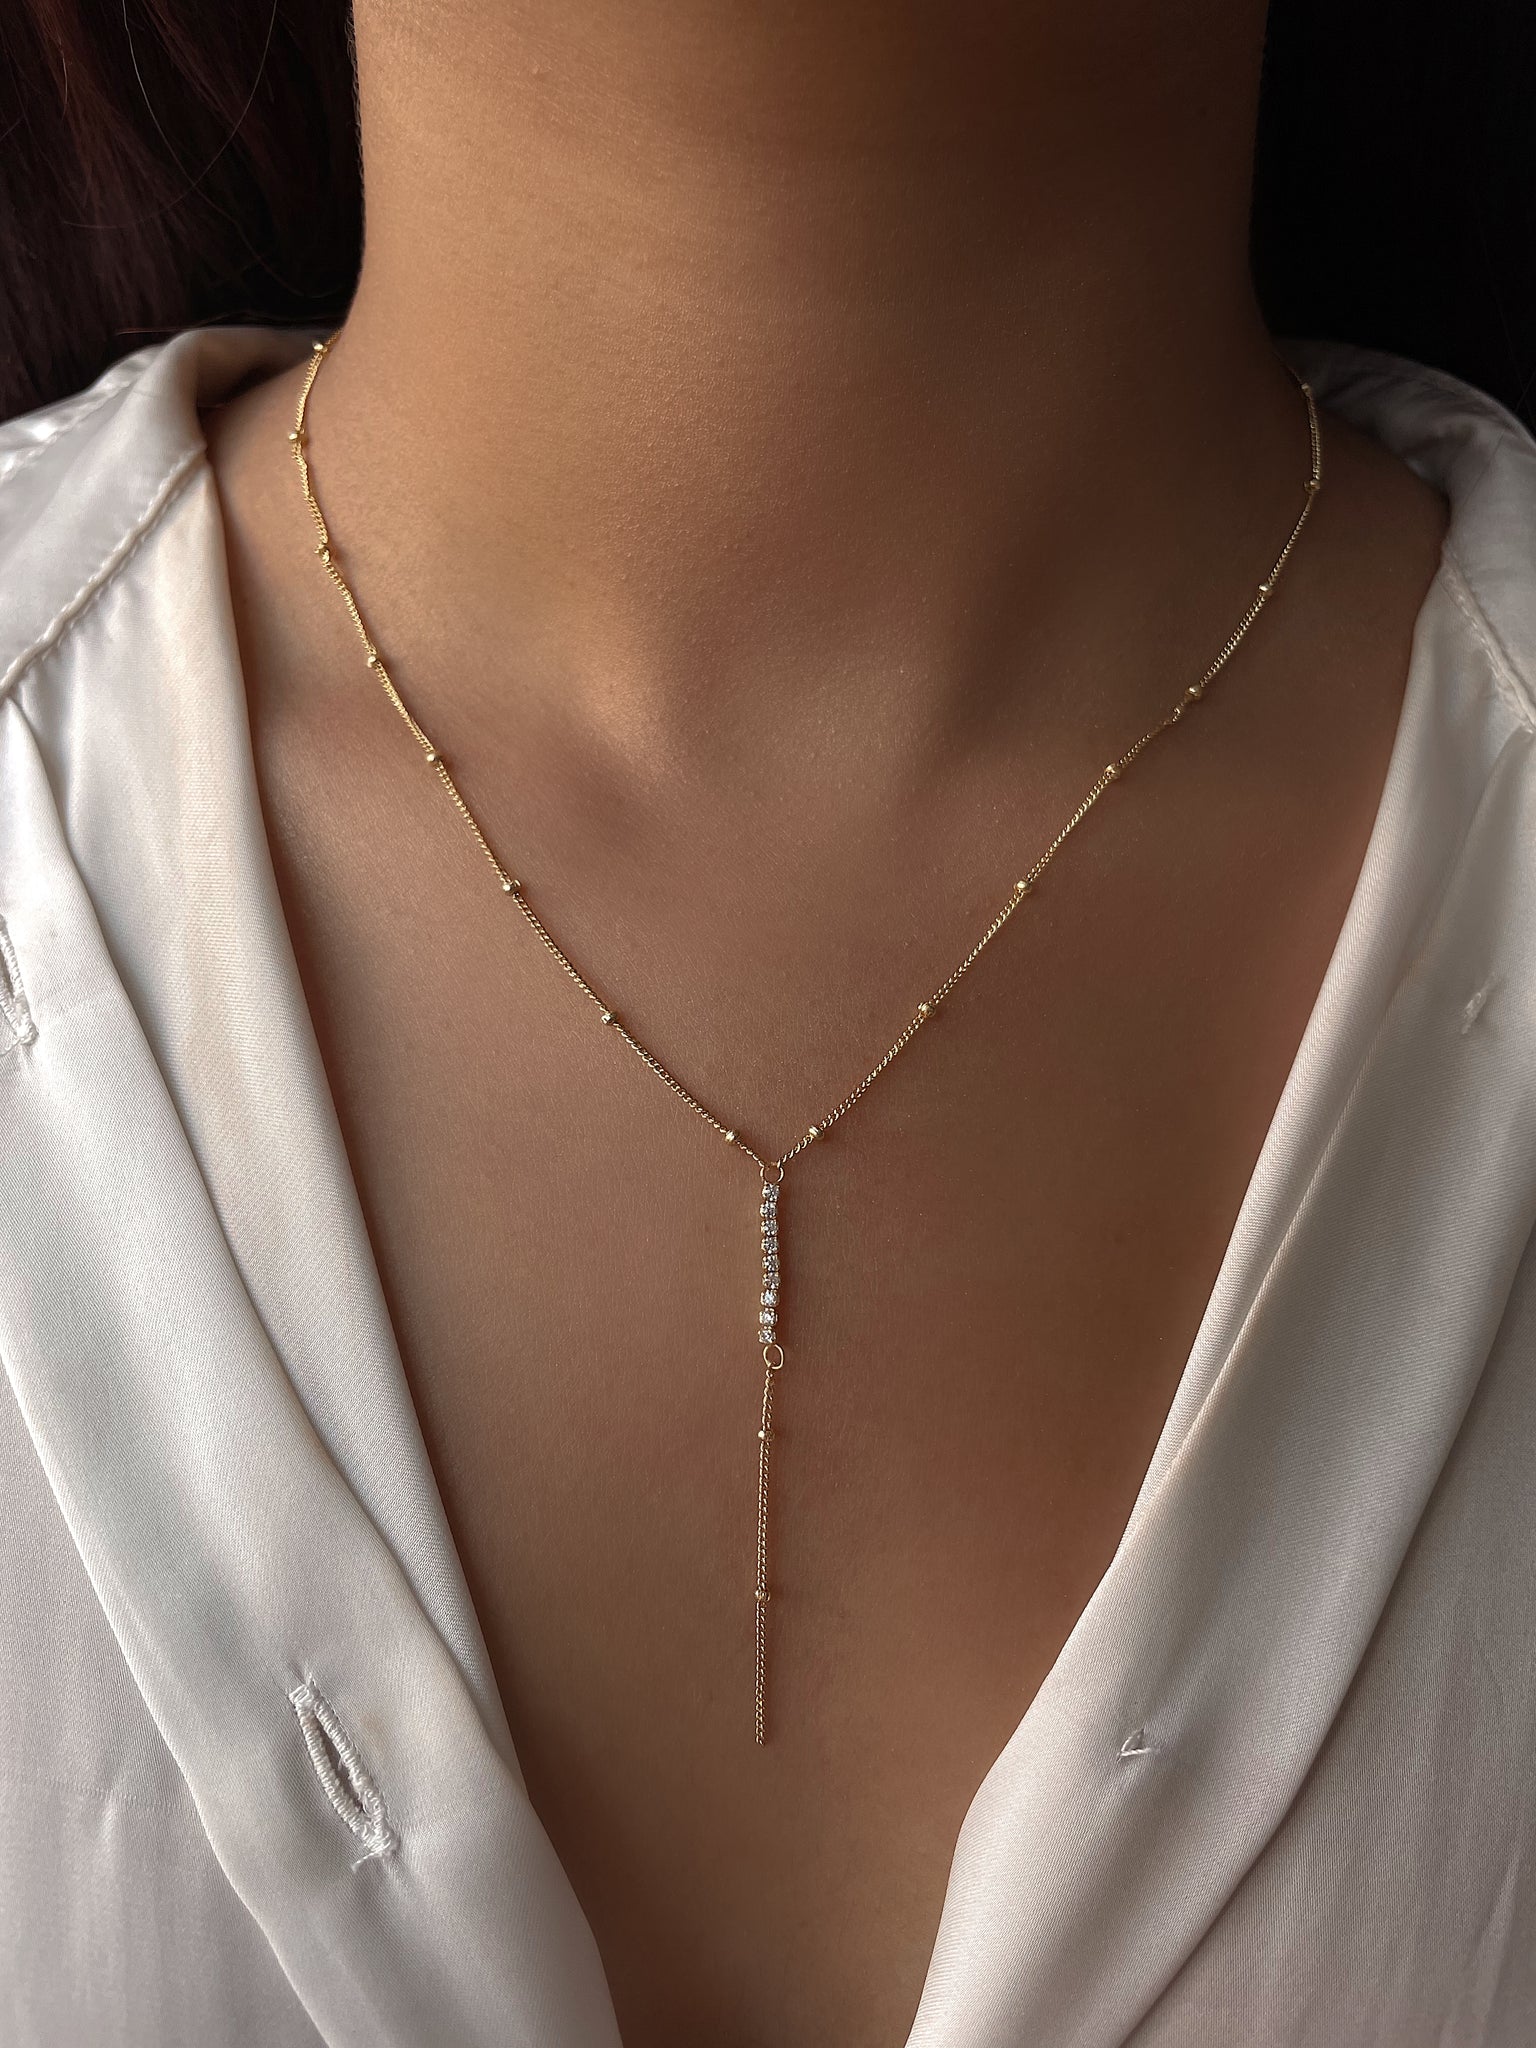 HAWA | S925 Sterling Silver | 18ct Gold/Platinum Plated | Linear Encrusted Bar Necklace